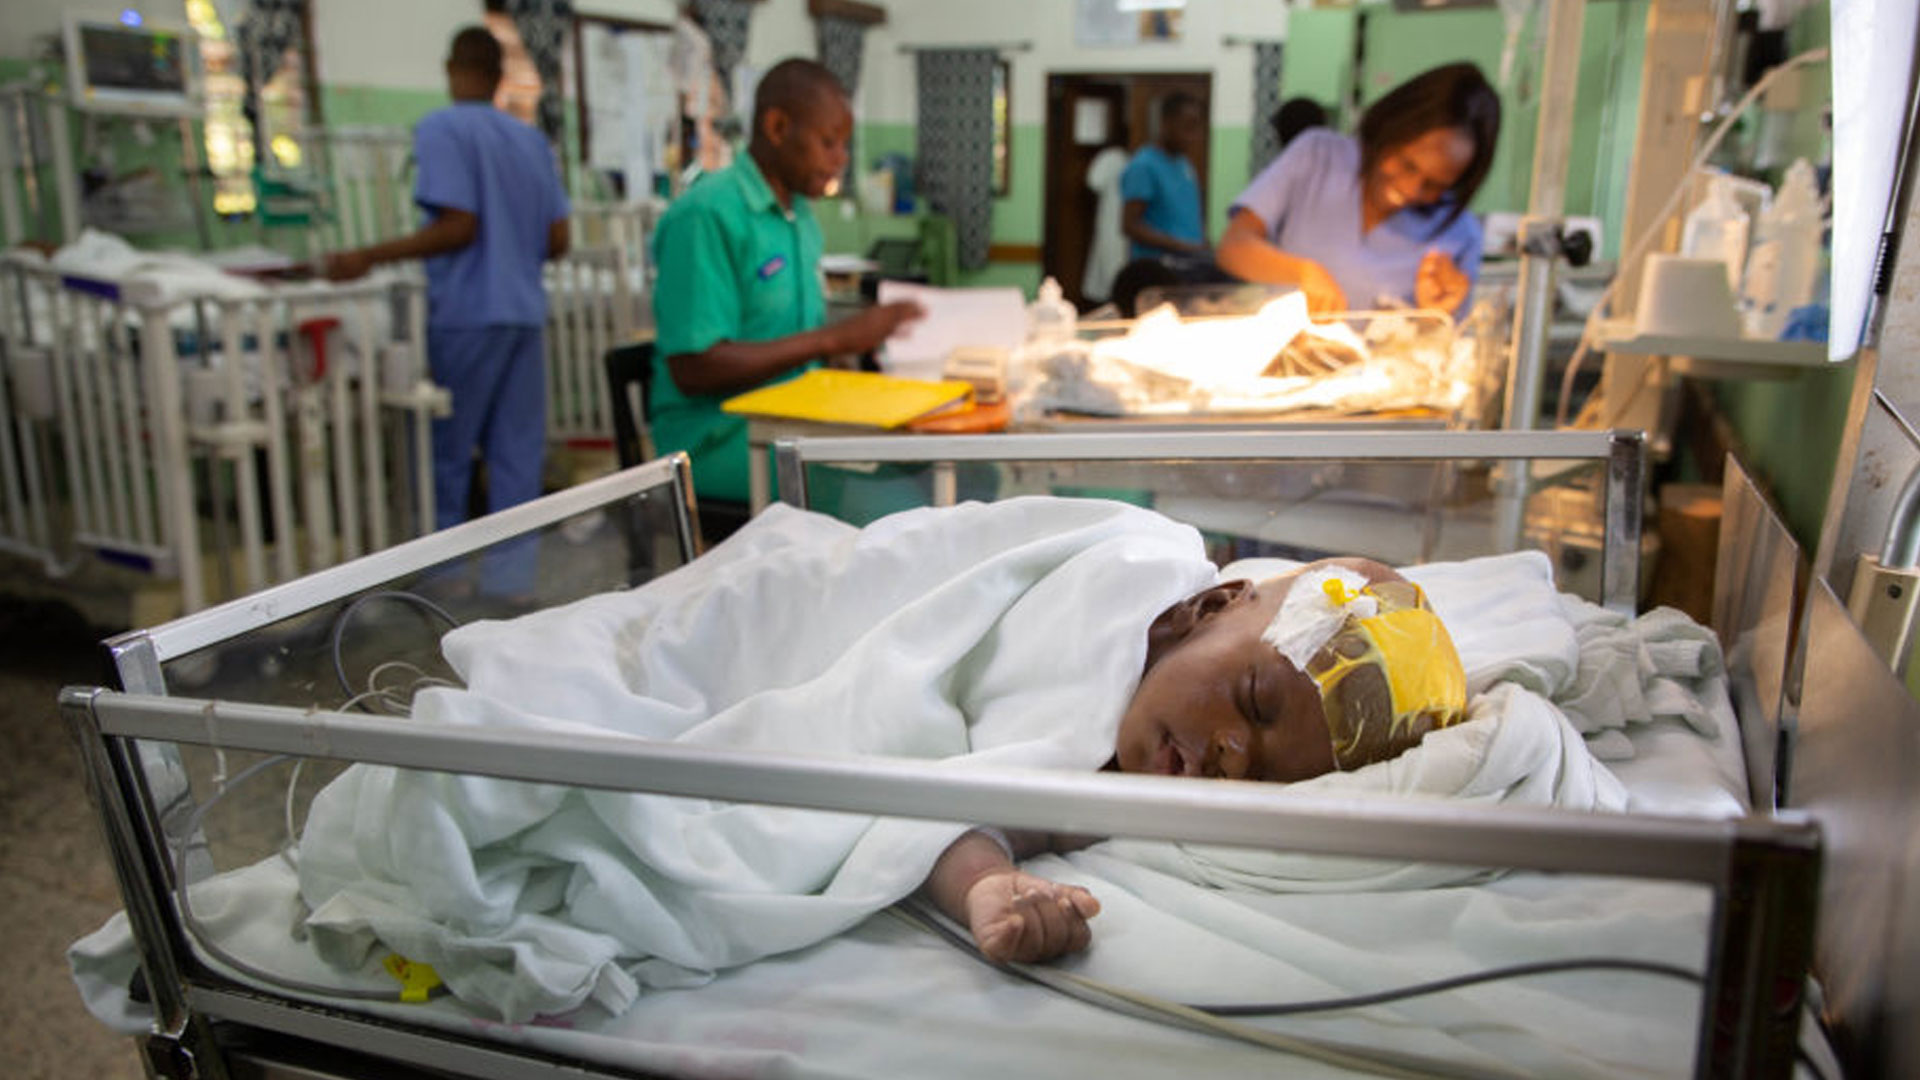 The incidence of postoperative seizures following treatment of postinfectious hydrocephalus in Ugandan Infants: A post hoc comparison of endoscopic treatment vs shunt placement in a randomized controlled trial